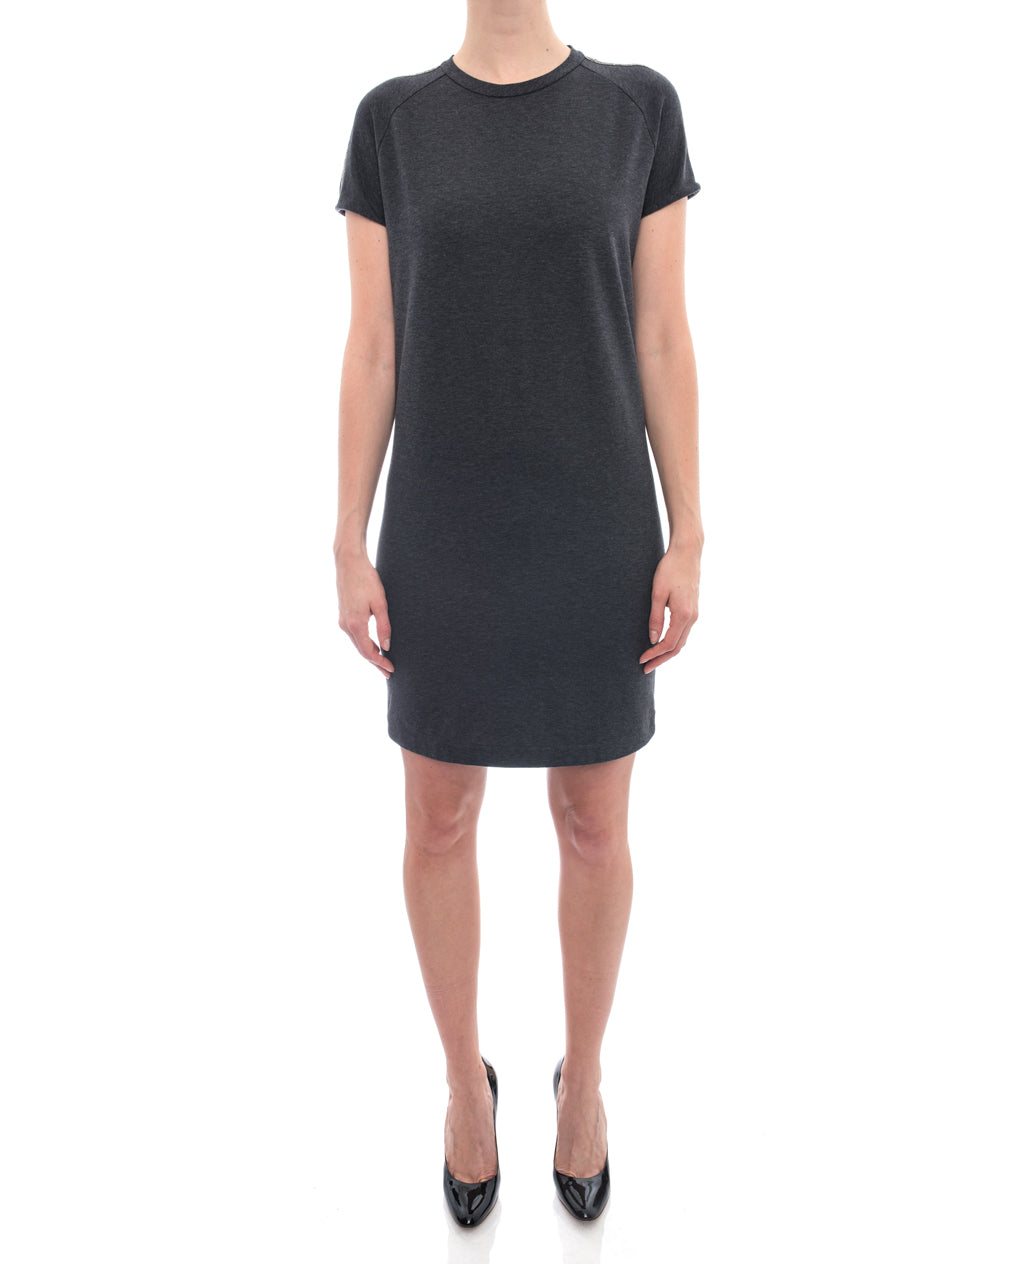 Brunello Cucinelli Charcoal Knit Jersey Dress with Chain Trim – 4